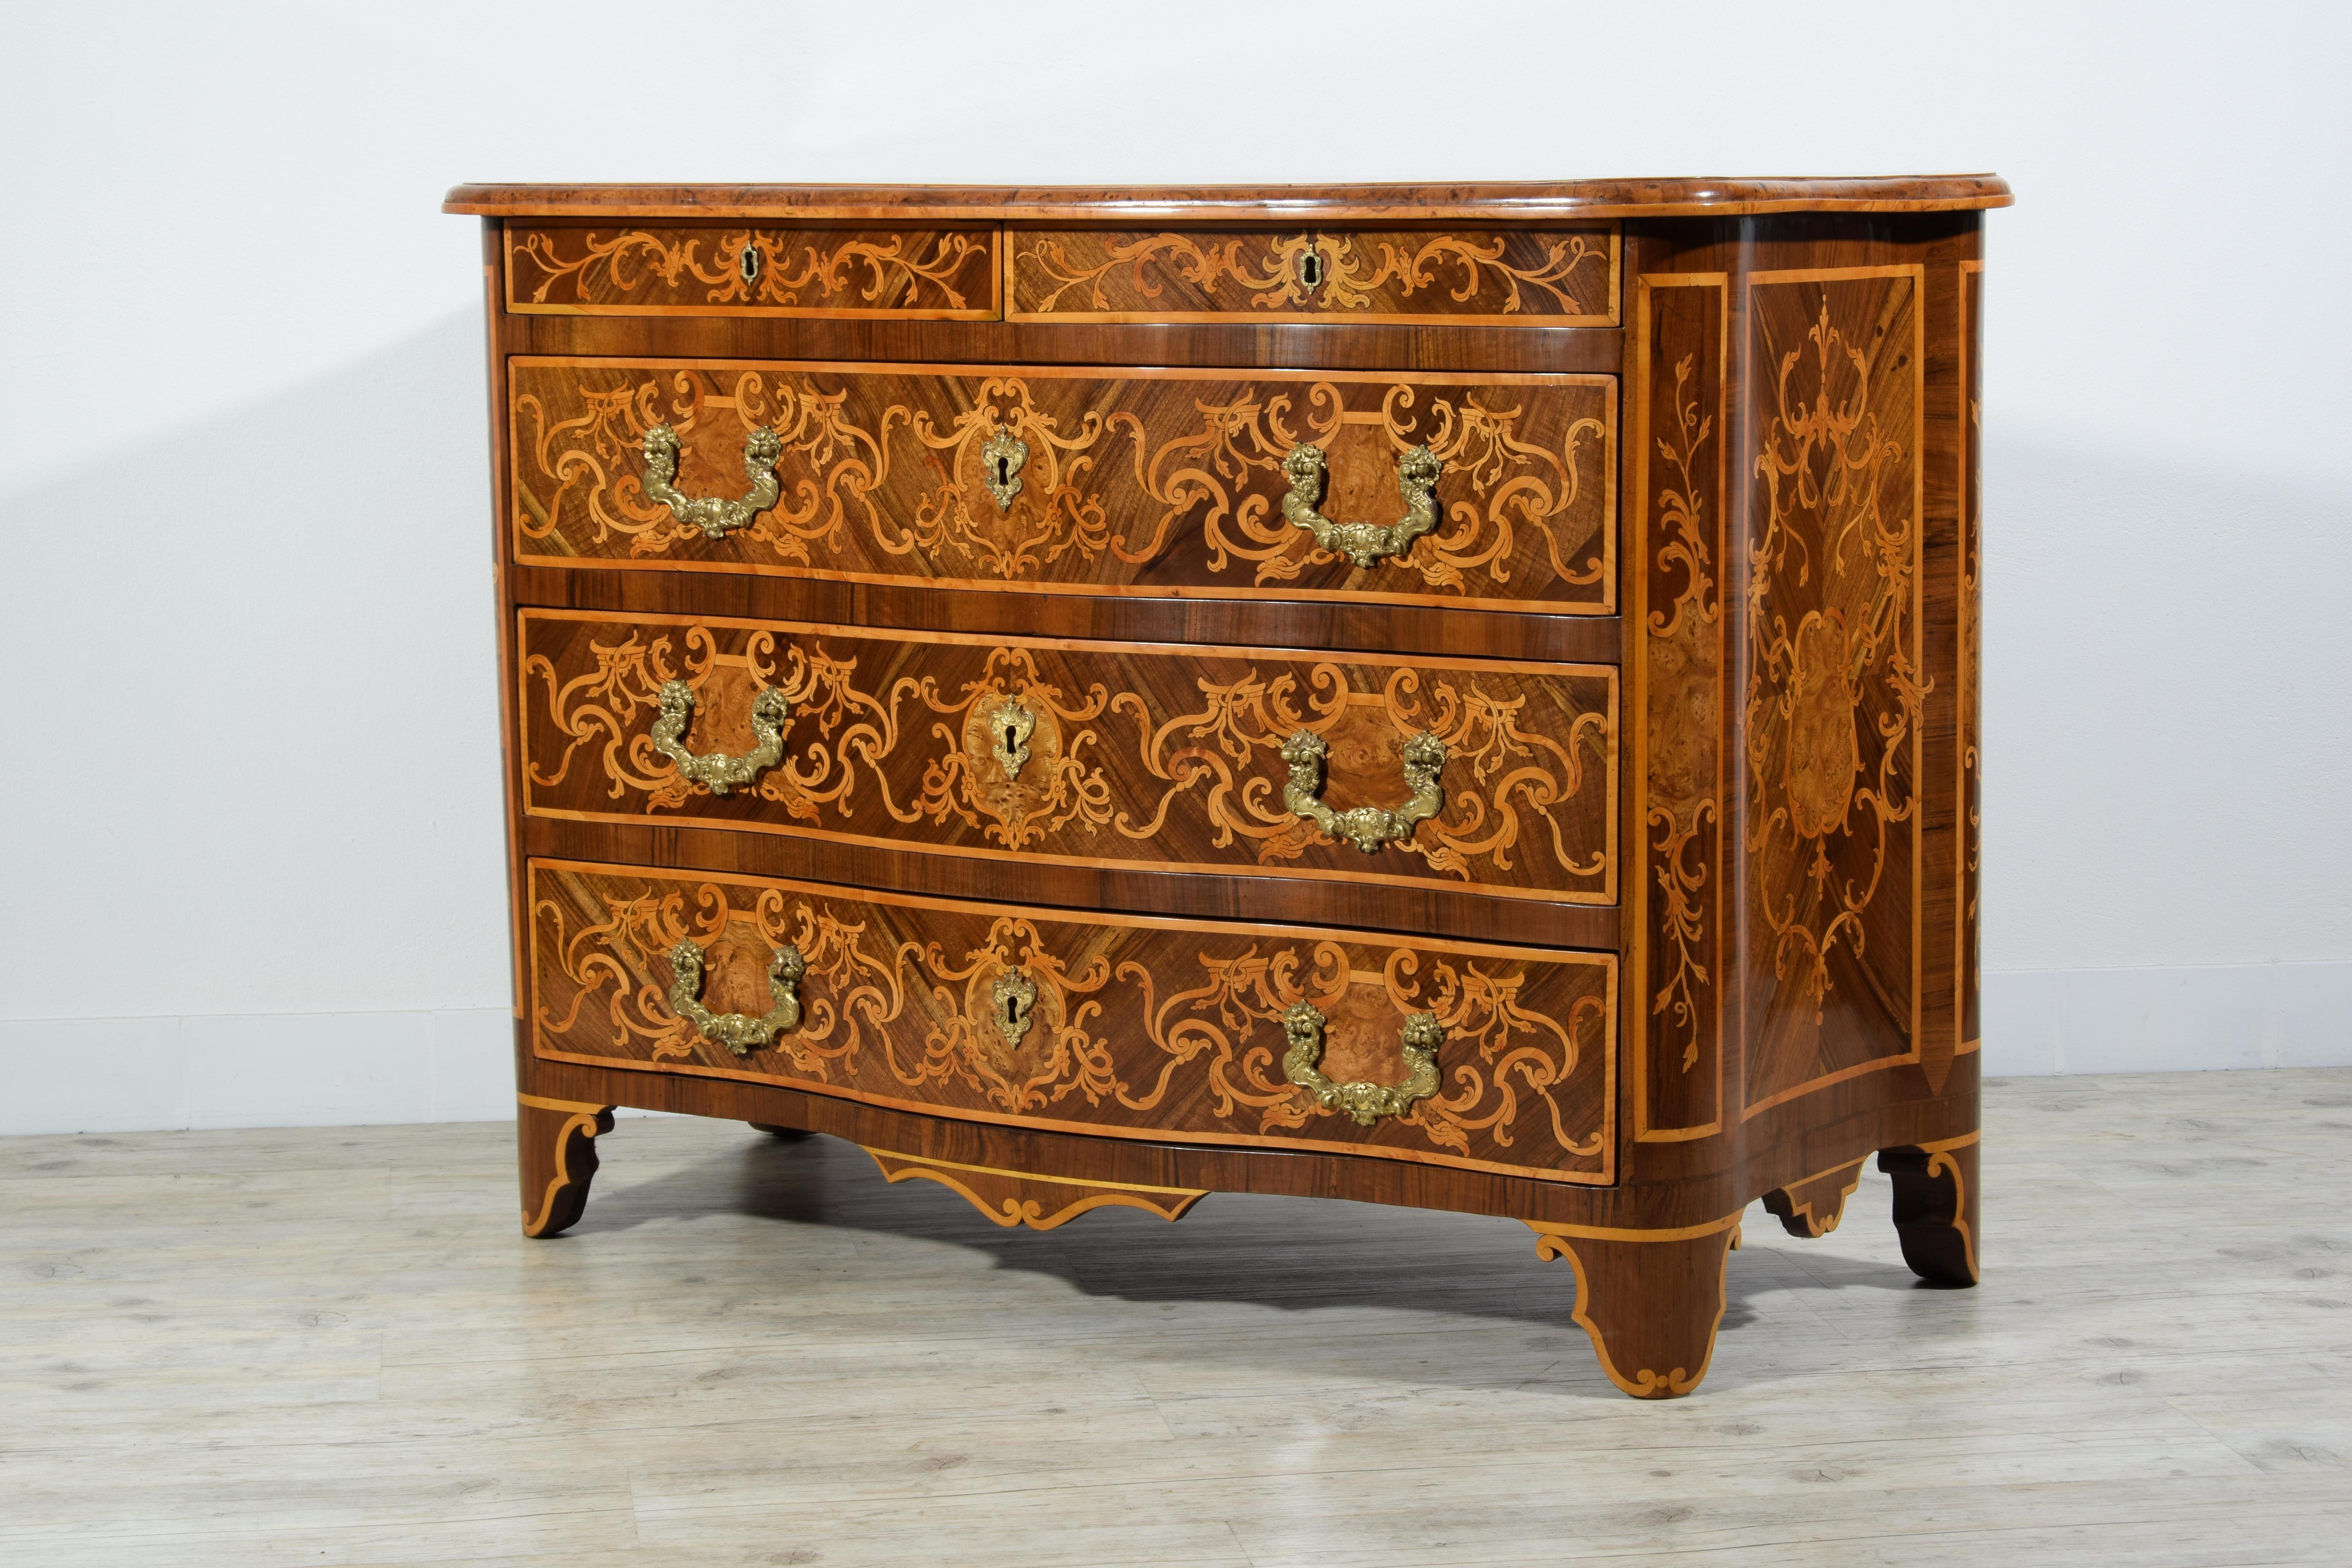 Baroque 18th Century Italian Paved and Inlaid Wood Chest of Drawers